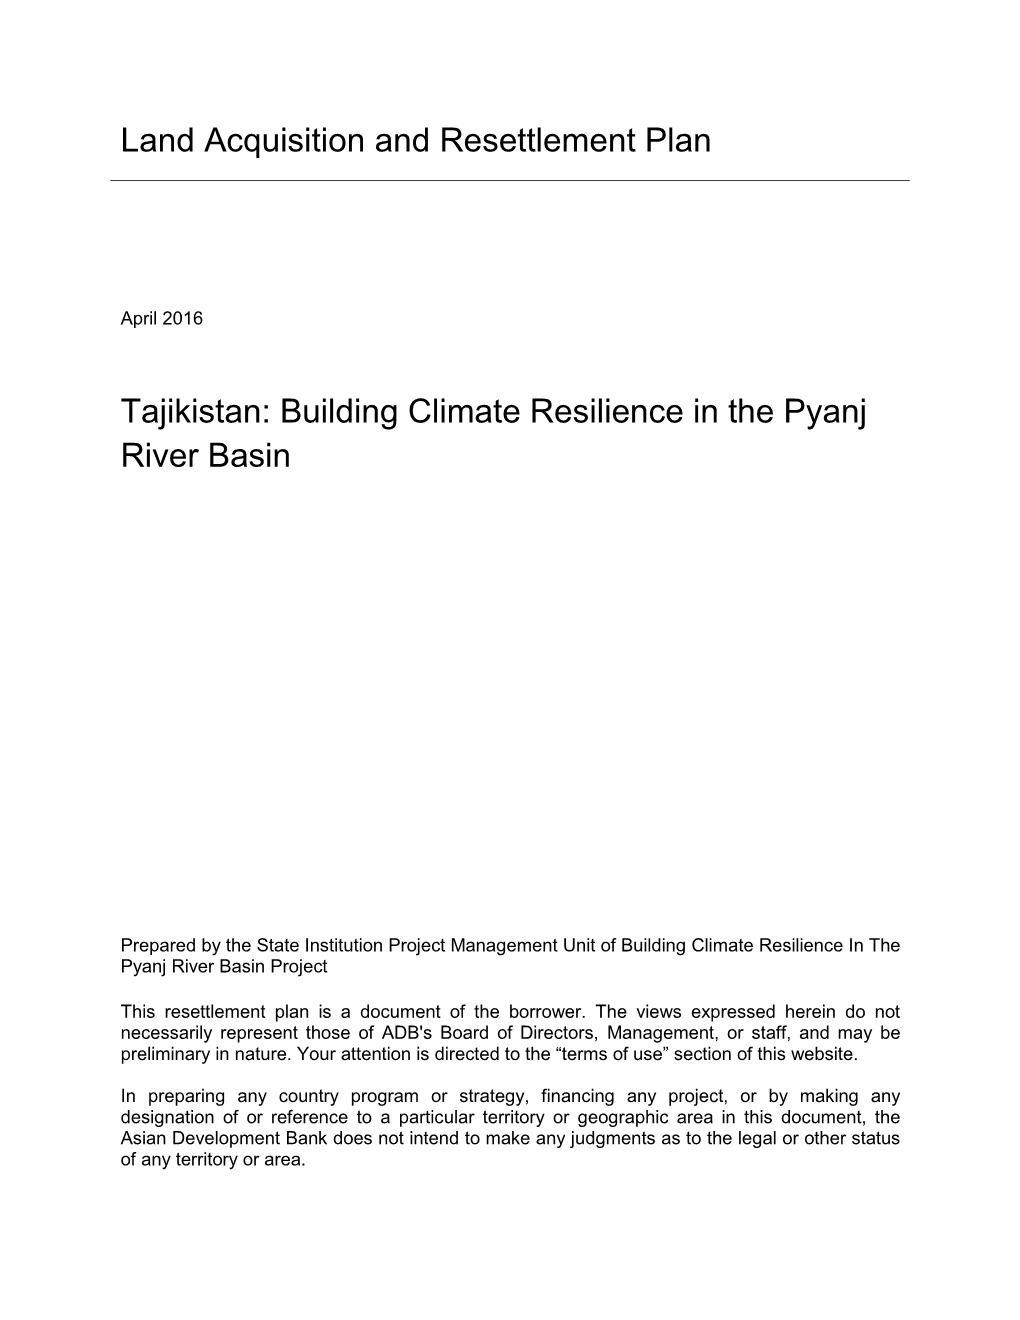 45354-002: Building Climate Resilience in the Pyanj River Basin